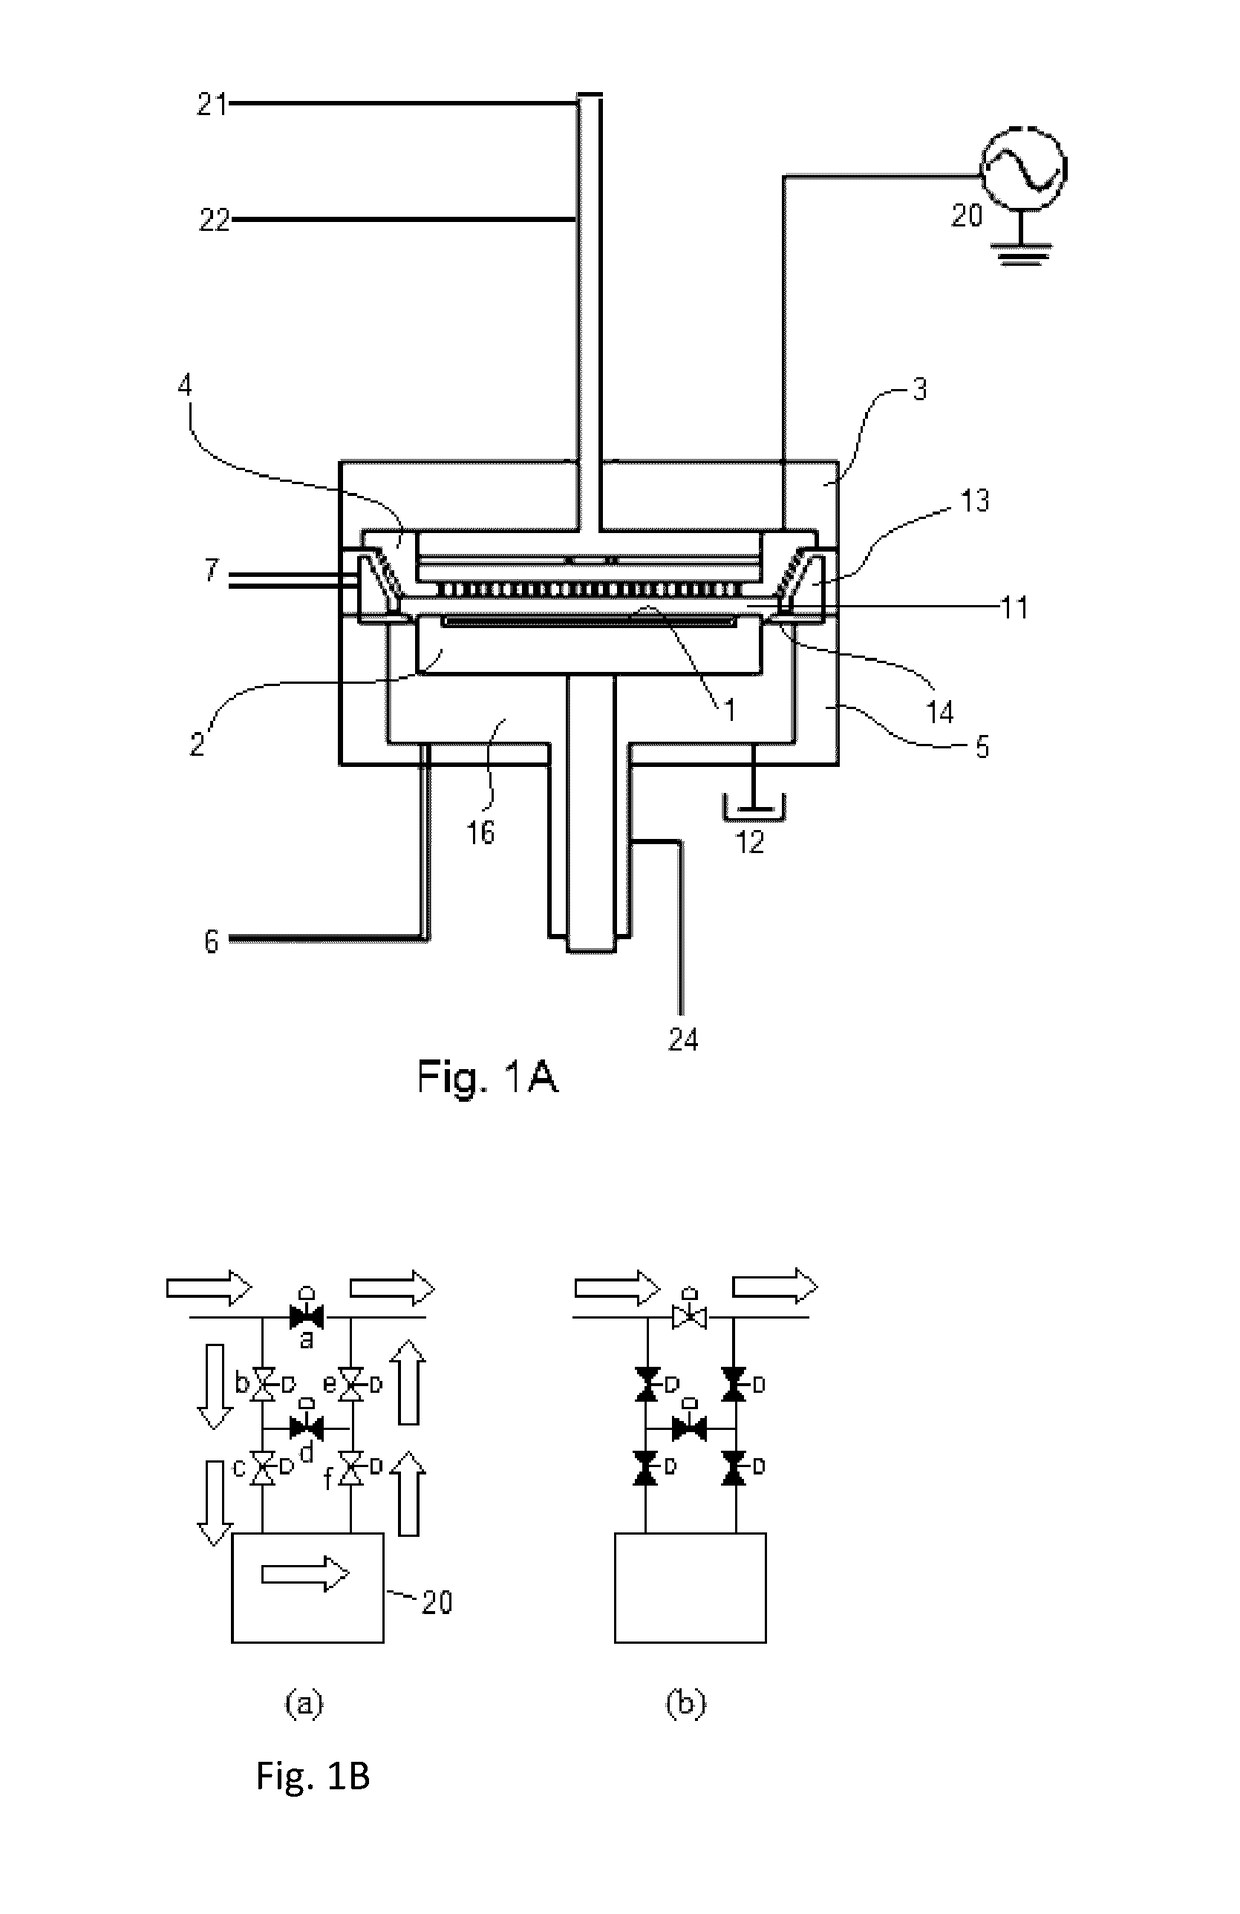 Method for depositing dielectric film in trenches by peald